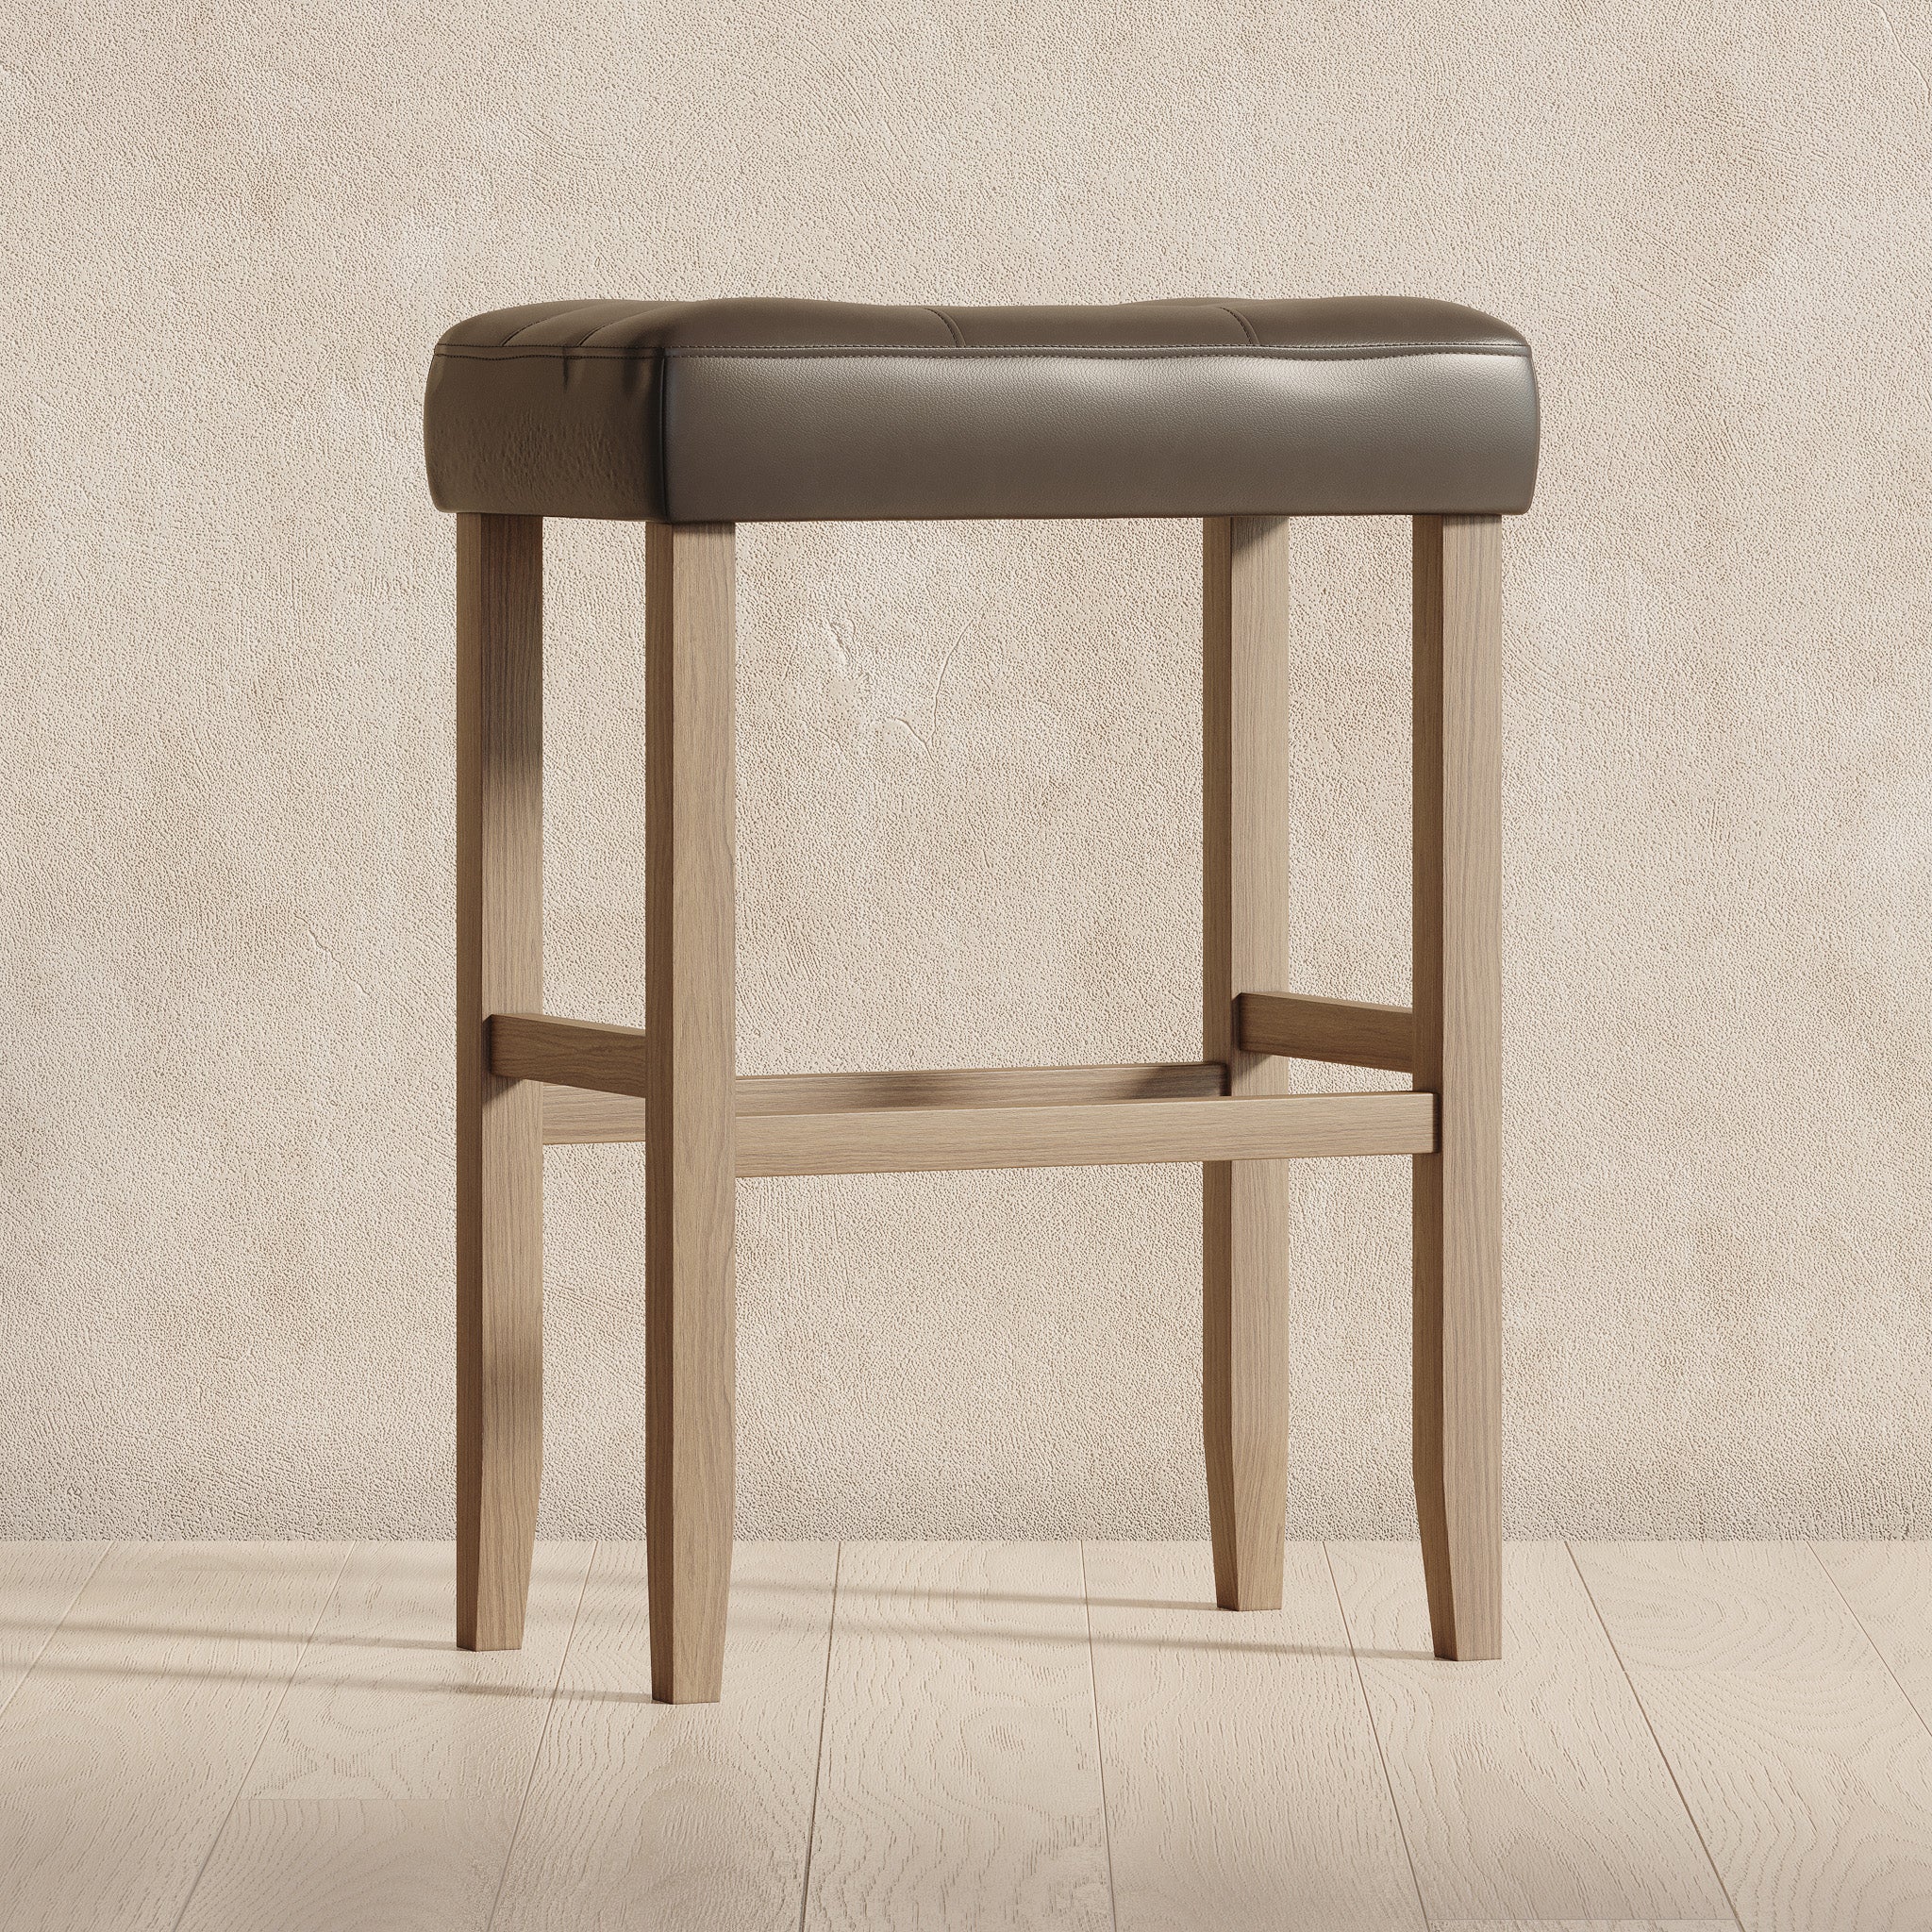 Harper Bar Stool in Weathered Oak Wood Finish with Distressed Grey Vegan Leather, Set of 2 in Stools by Maven Lane